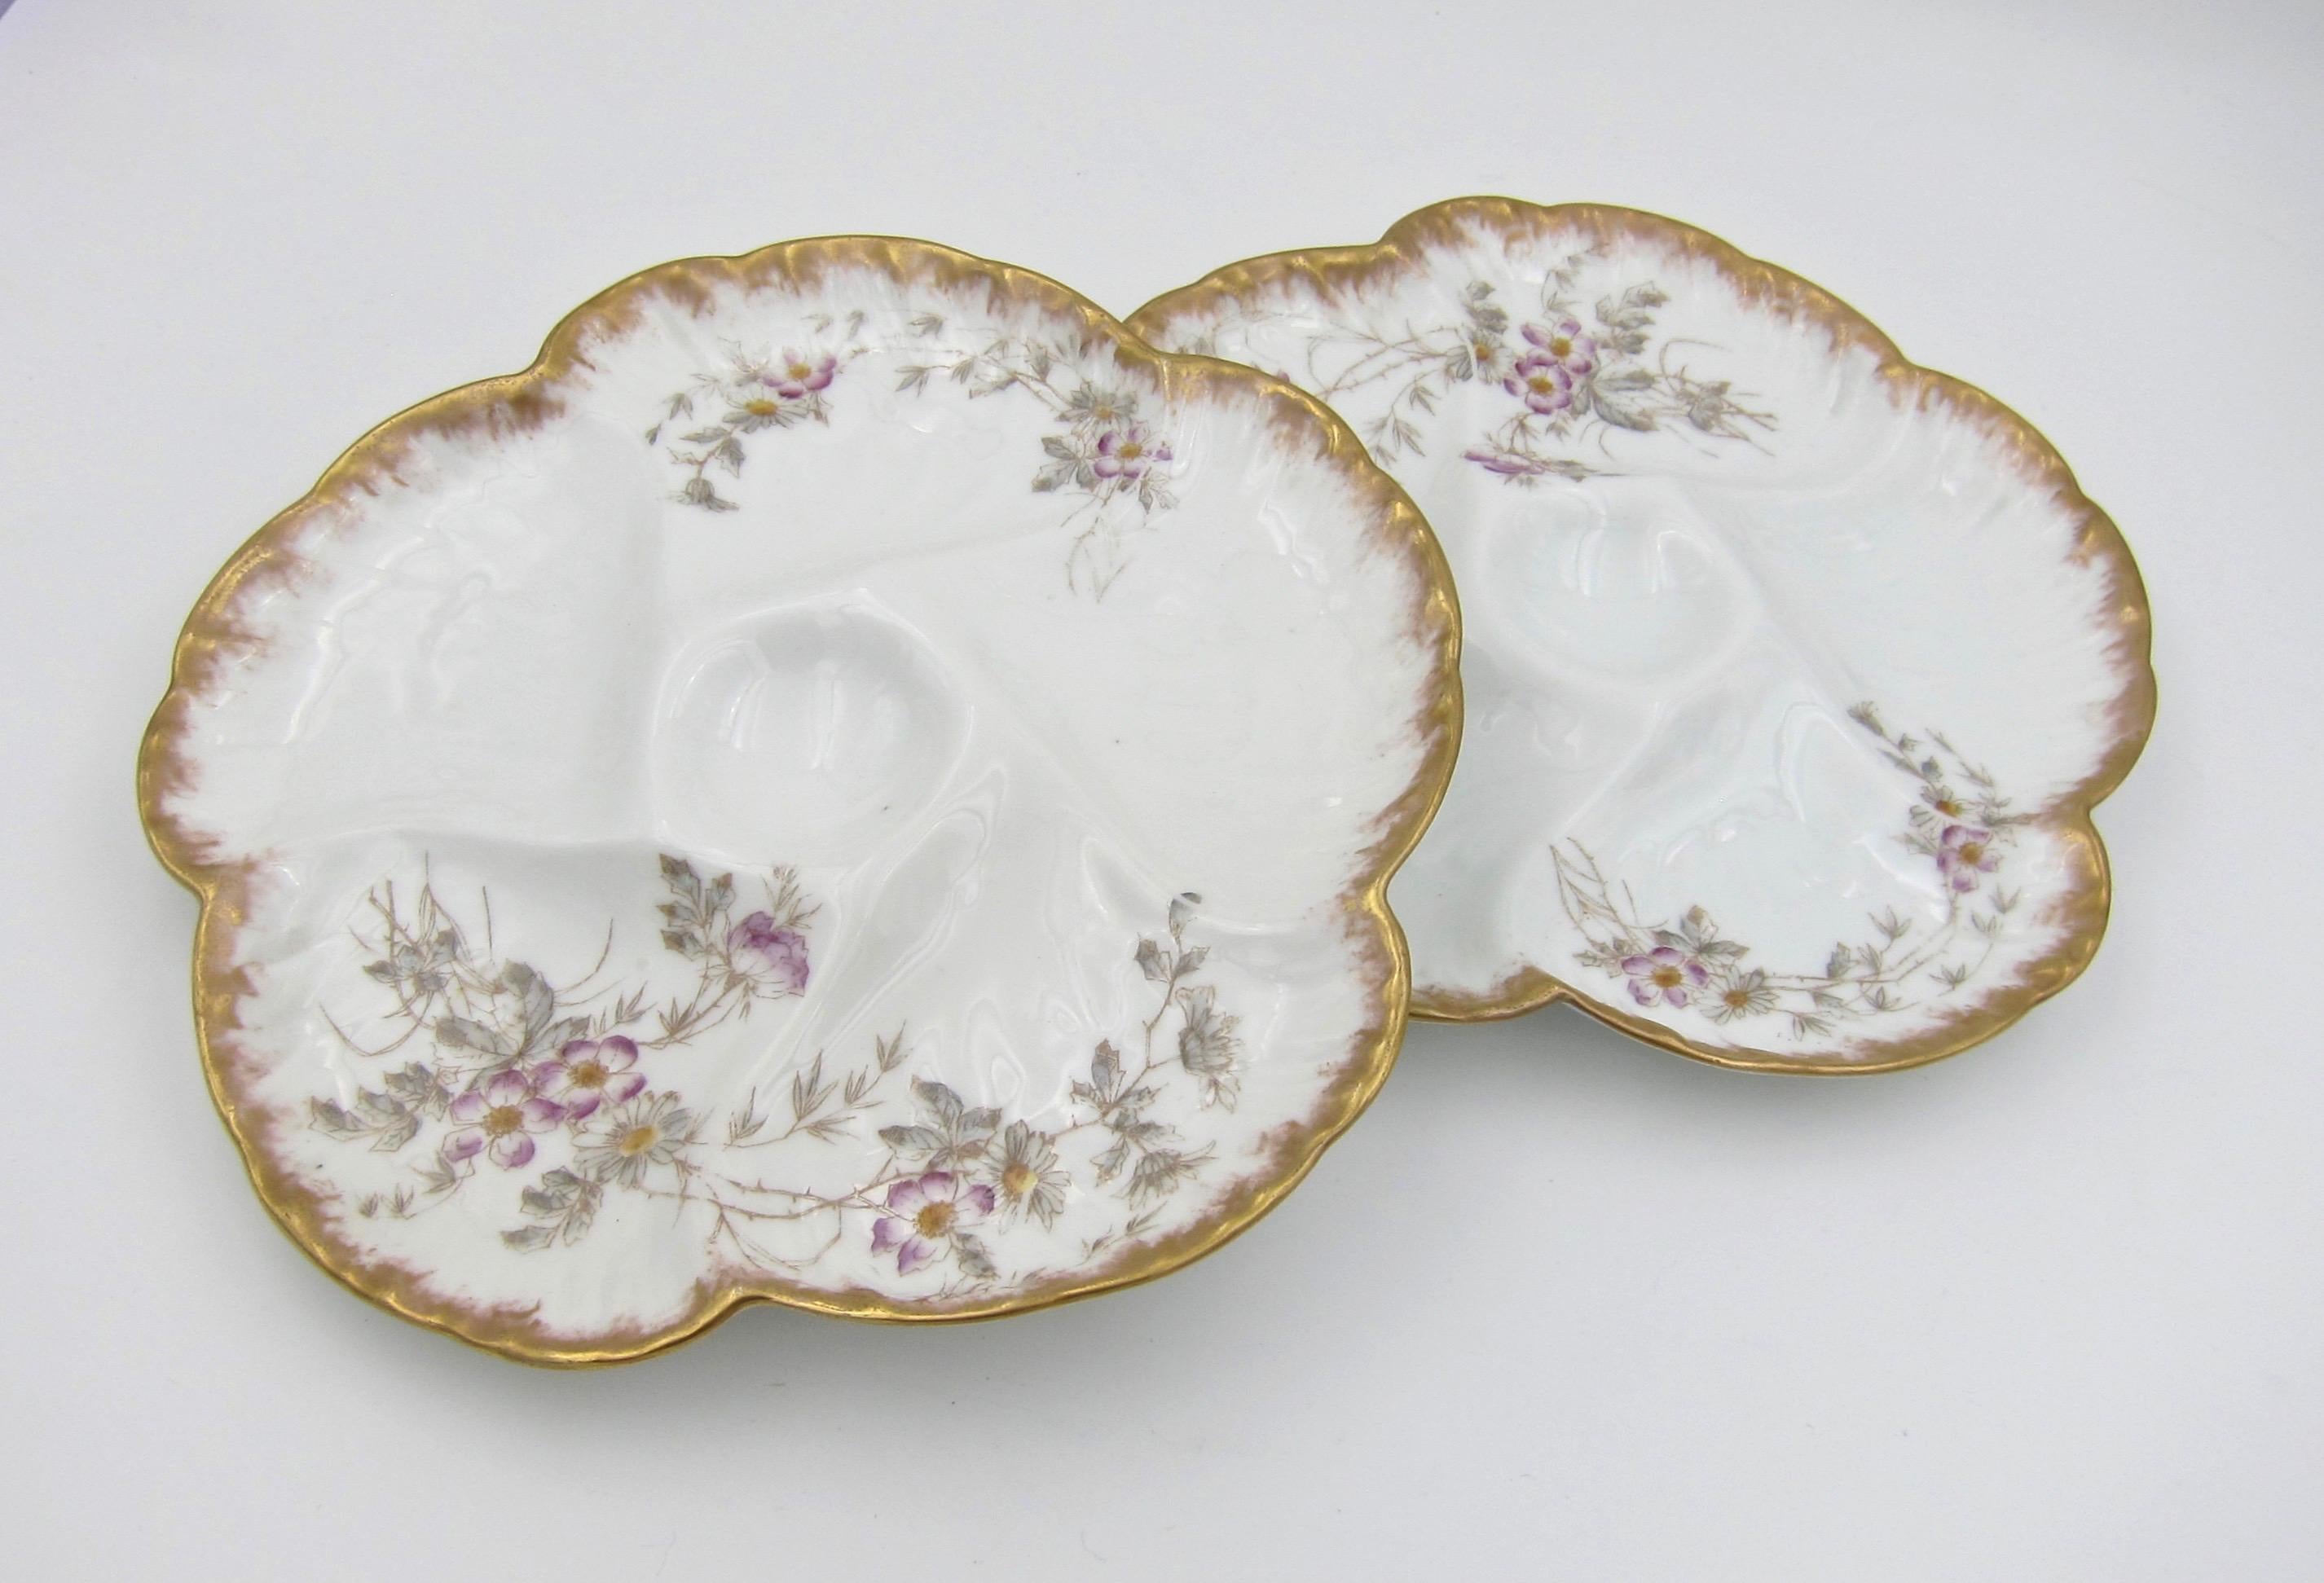 Victorian Antique Limoges Porcelain French Oyster Plate Pair, 1880s